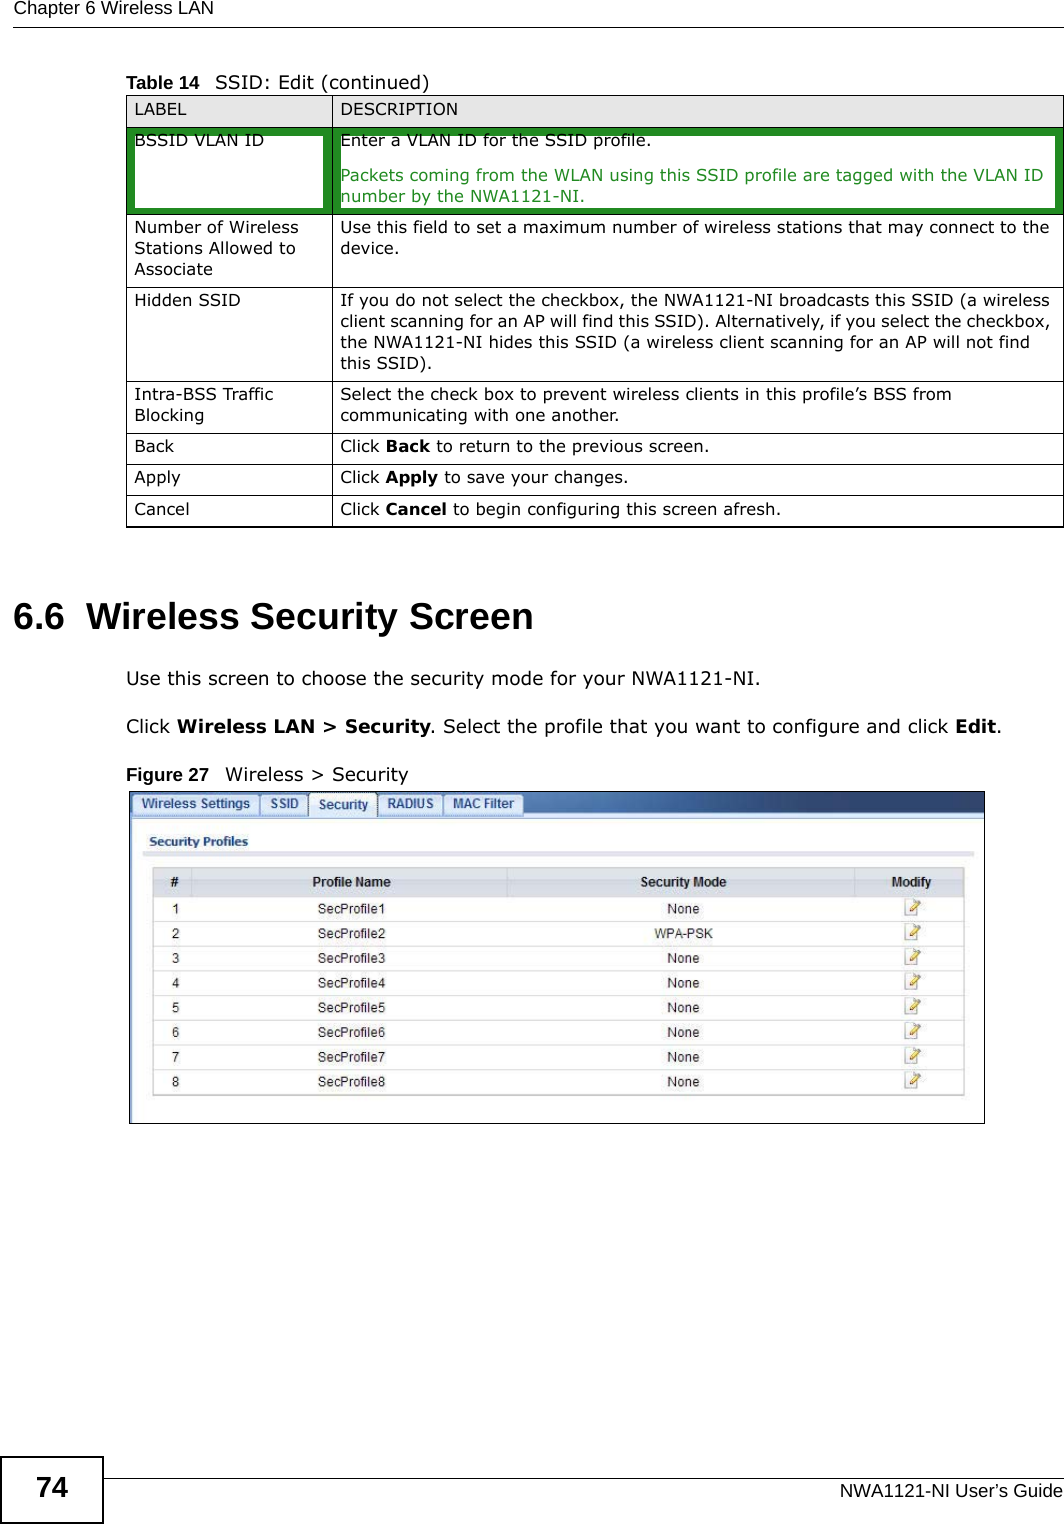 Chapter 6 Wireless LANNWA1121-NI User’s Guide746.6  Wireless Security ScreenUse this screen to choose the security mode for your NWA1121-NI. Click Wireless LAN &gt; Security. Select the profile that you want to configure and click Edit.Figure 27   Wireless &gt; SecurityBSSID VLAN ID Enter a VLAN ID for the SSID profile.Packets coming from the WLAN using this SSID profile are tagged with the VLAN ID number by the NWA1121-NI. Number of Wireless Stations Allowed to AssociateUse this field to set a maximum number of wireless stations that may connect to the device.Hidden SSID If you do not select the checkbox, the NWA1121-NI broadcasts this SSID (a wireless client scanning for an AP will find this SSID). Alternatively, if you select the checkbox, the NWA1121-NI hides this SSID (a wireless client scanning for an AP will not find this SSID).Intra-BSS Traffic BlockingSelect the check box to prevent wireless clients in this profile’s BSS from communicating with one another.Back Click Back to return to the previous screen.Apply Click Apply to save your changes.Cancel Click Cancel to begin configuring this screen afresh.Table 14   SSID: Edit (continued)LABEL DESCRIPTION